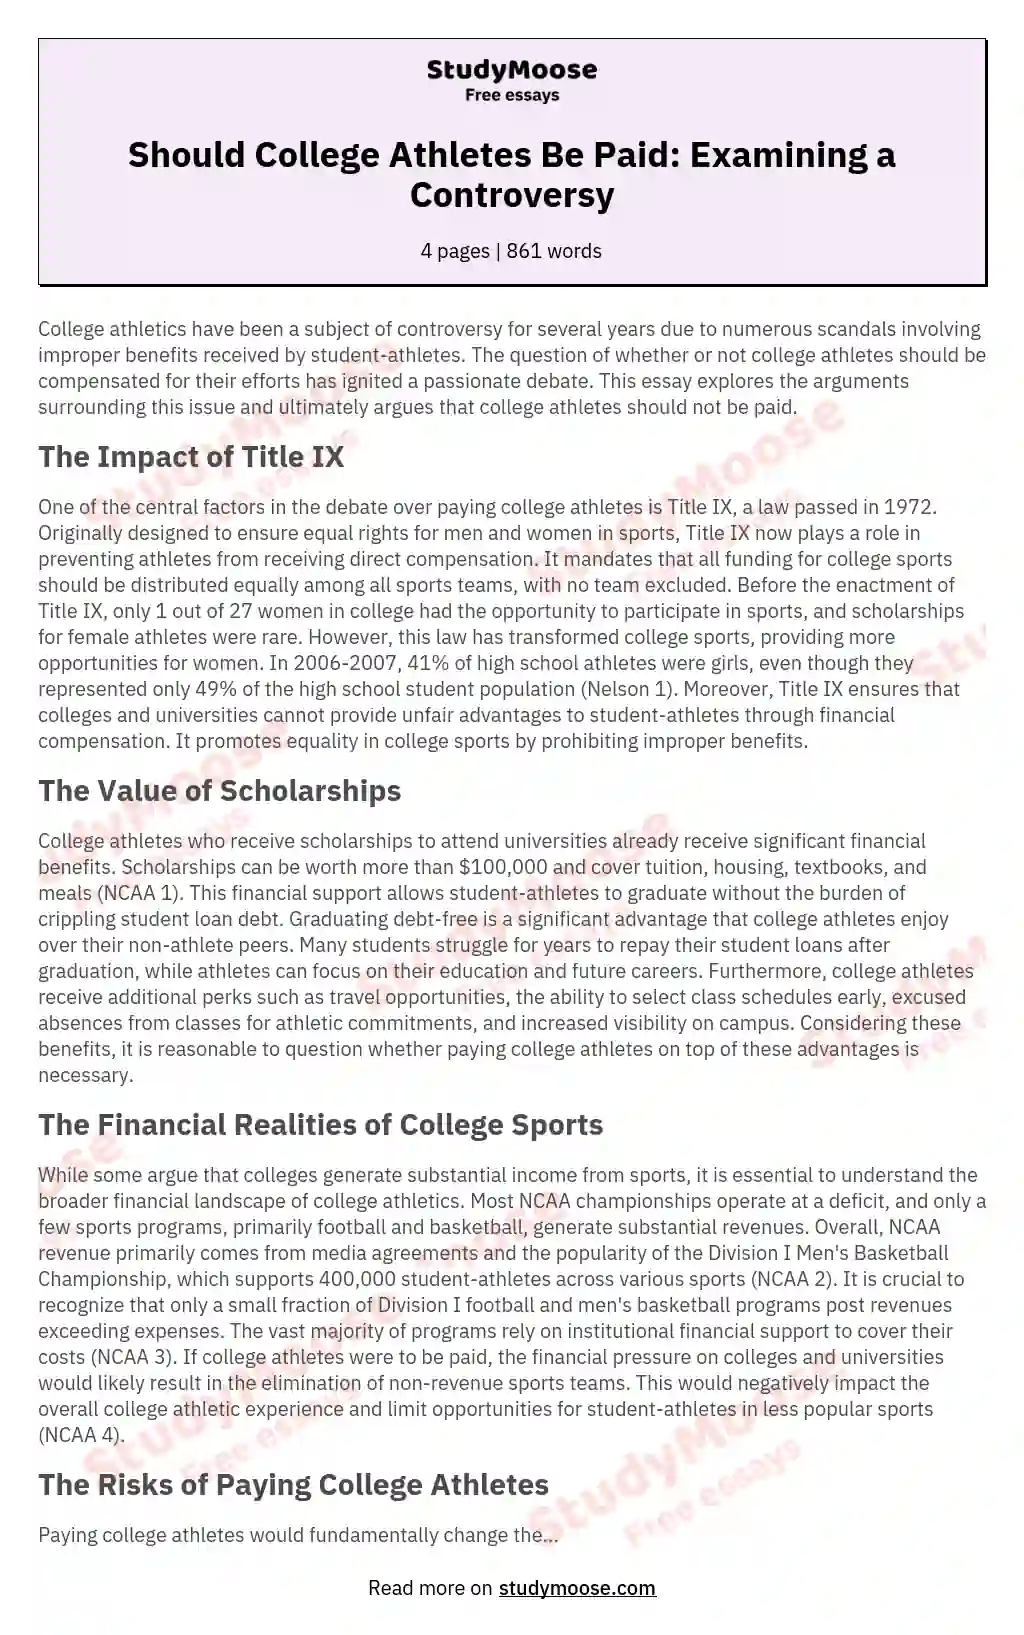 Why College Athletes Shouldn't Be Paid?